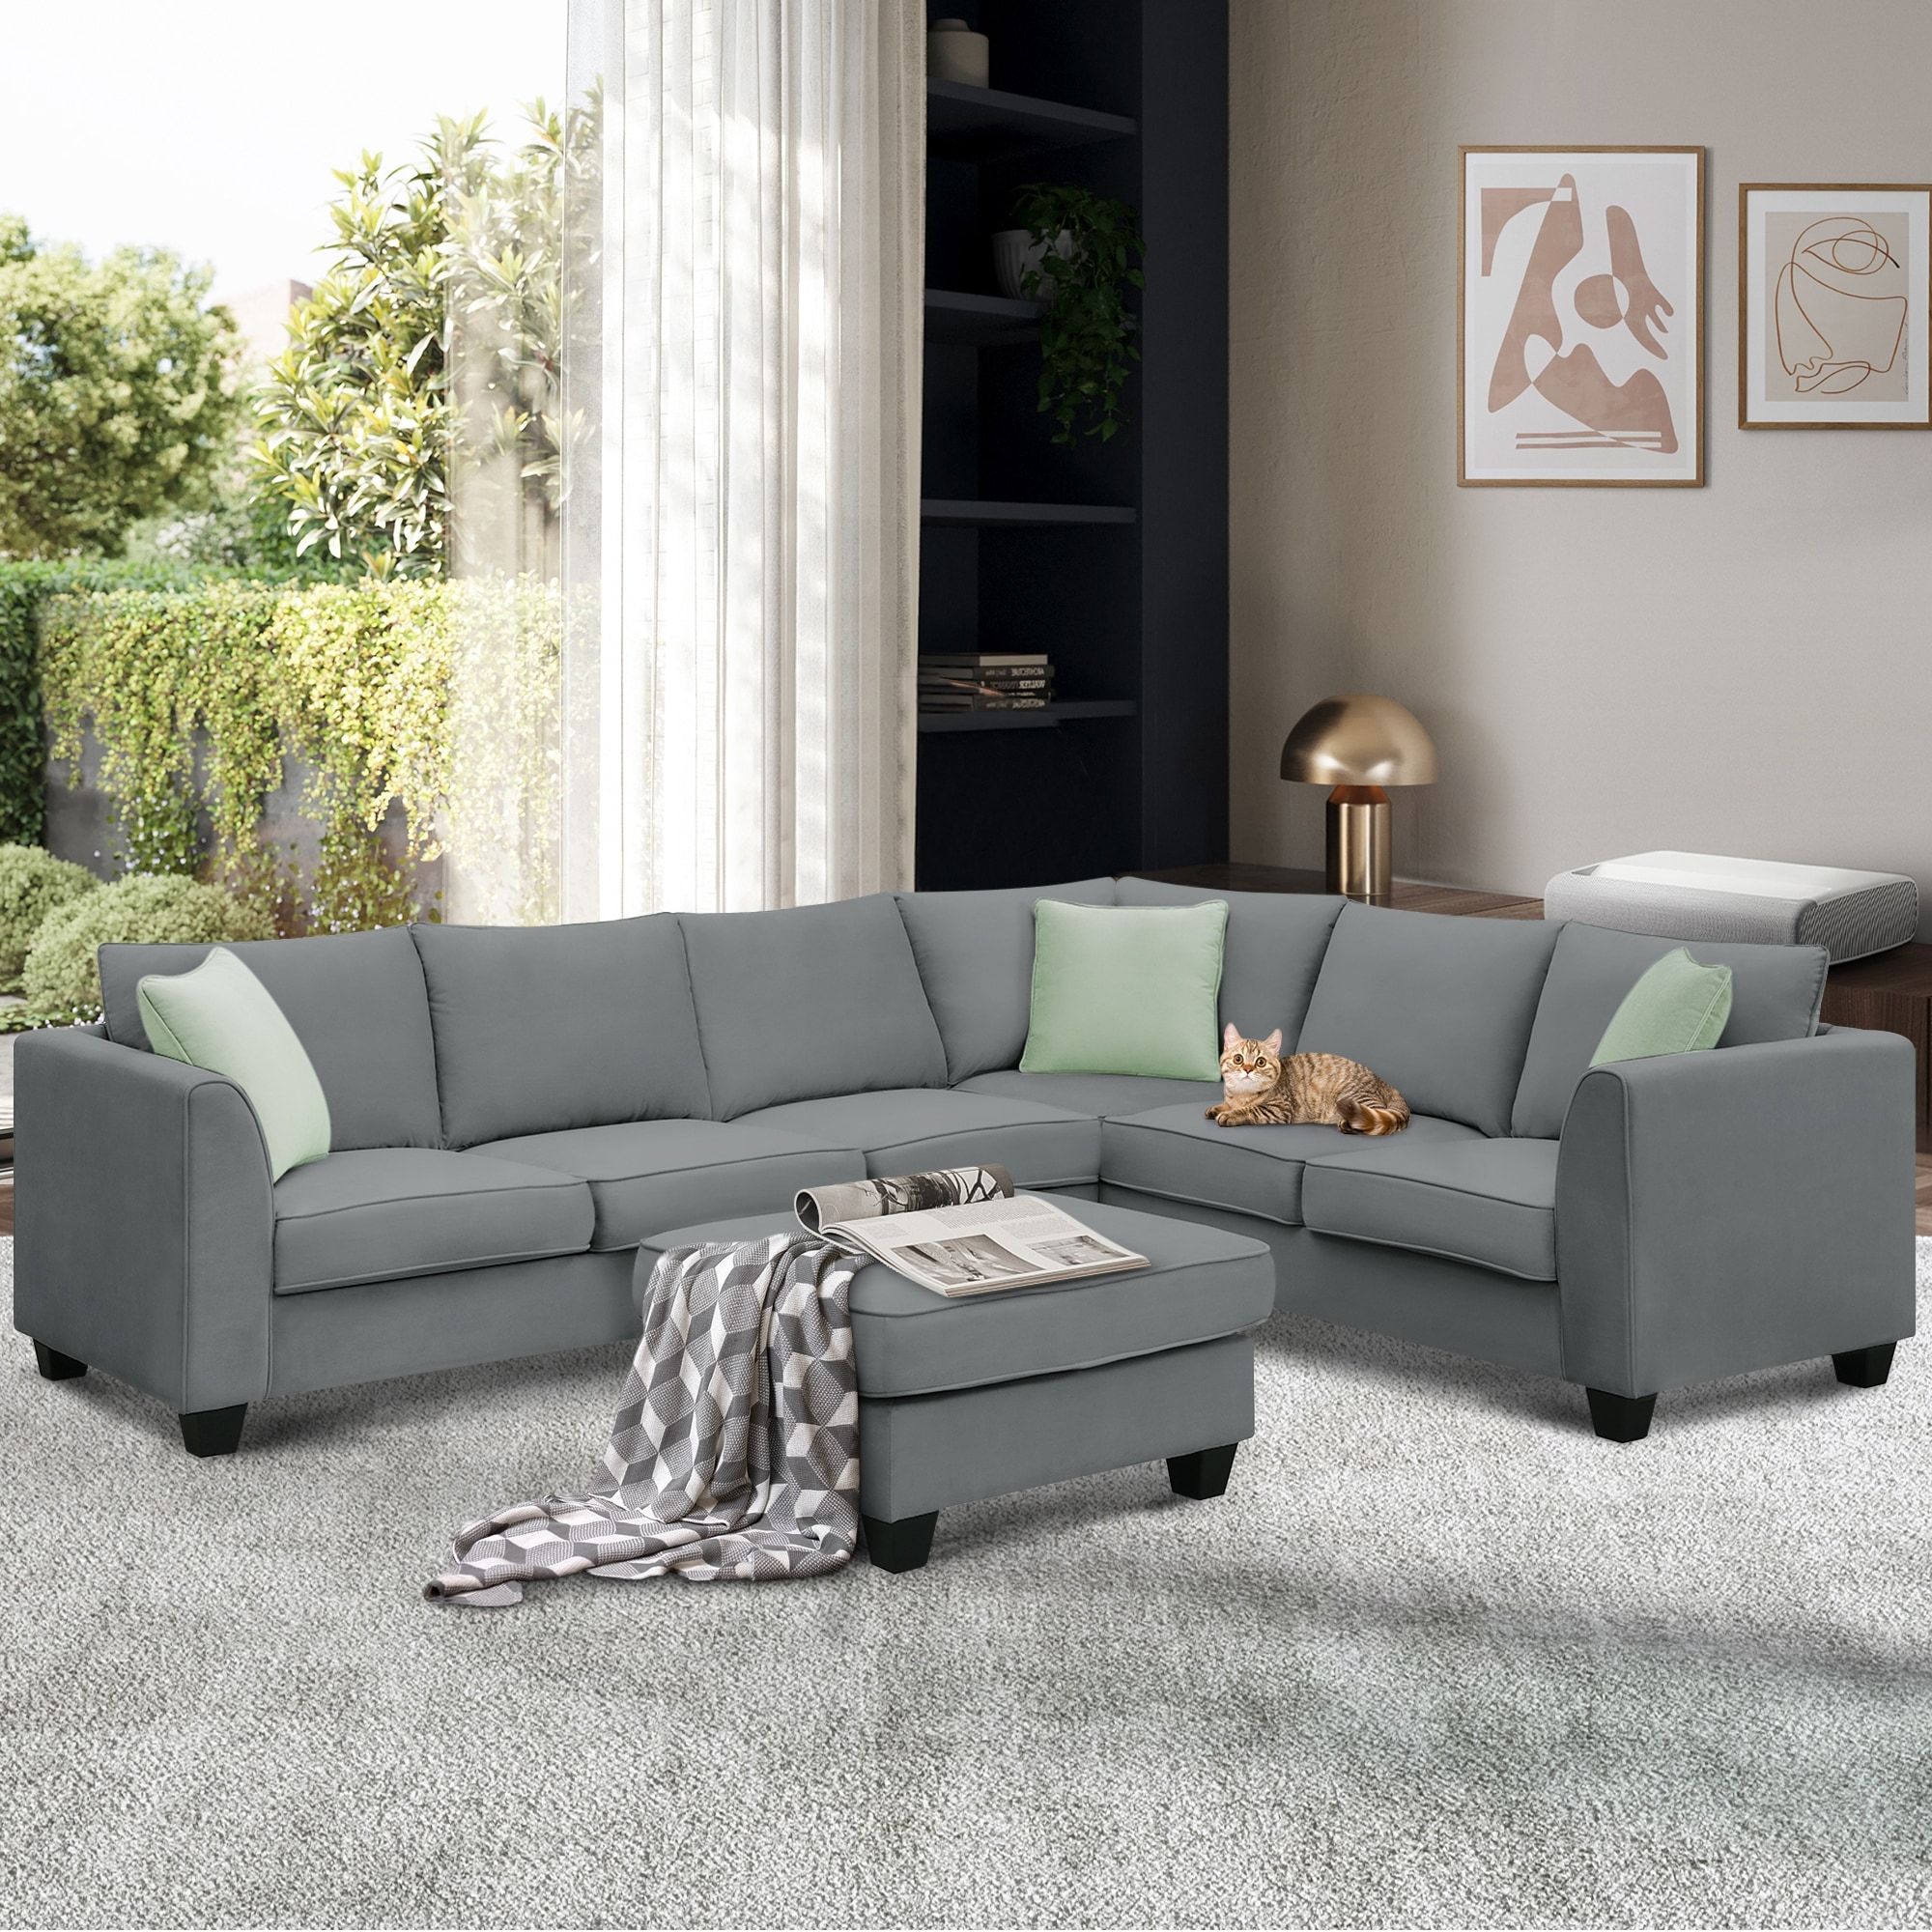 112" Sectional Sofa Couches Living Room Sets 7 Seats Sleeper Sofa With  Ottoman, L Shape Fabric Sofa, Pillow Back Sofa – – 37989197 Regarding Pillowback Sofa Sectionals (View 7 of 20)